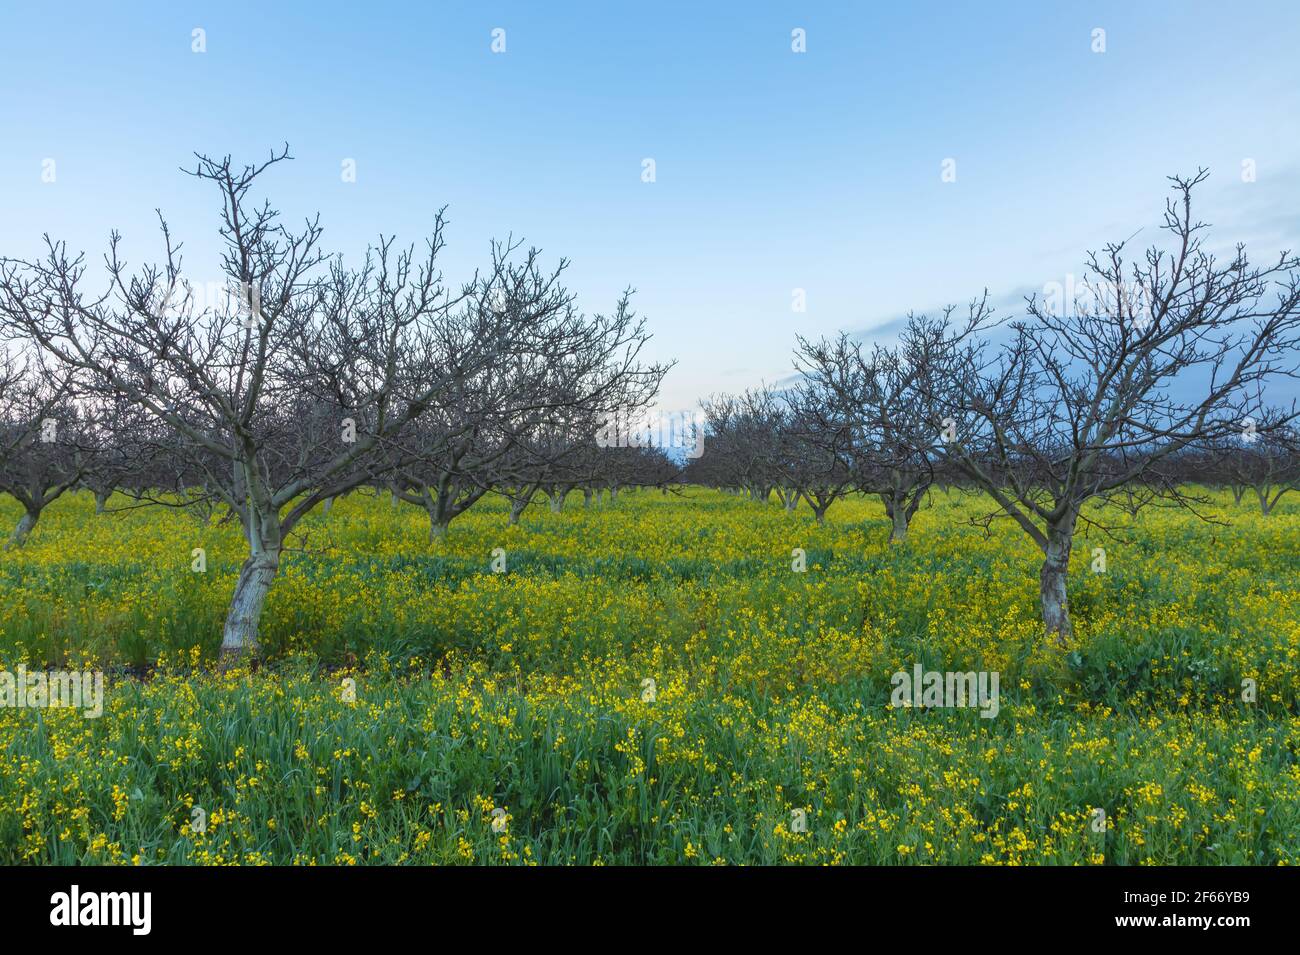 Blooming field mustard at the walnut farm in Gilroy, California, United States, in early spring. Stock Photo